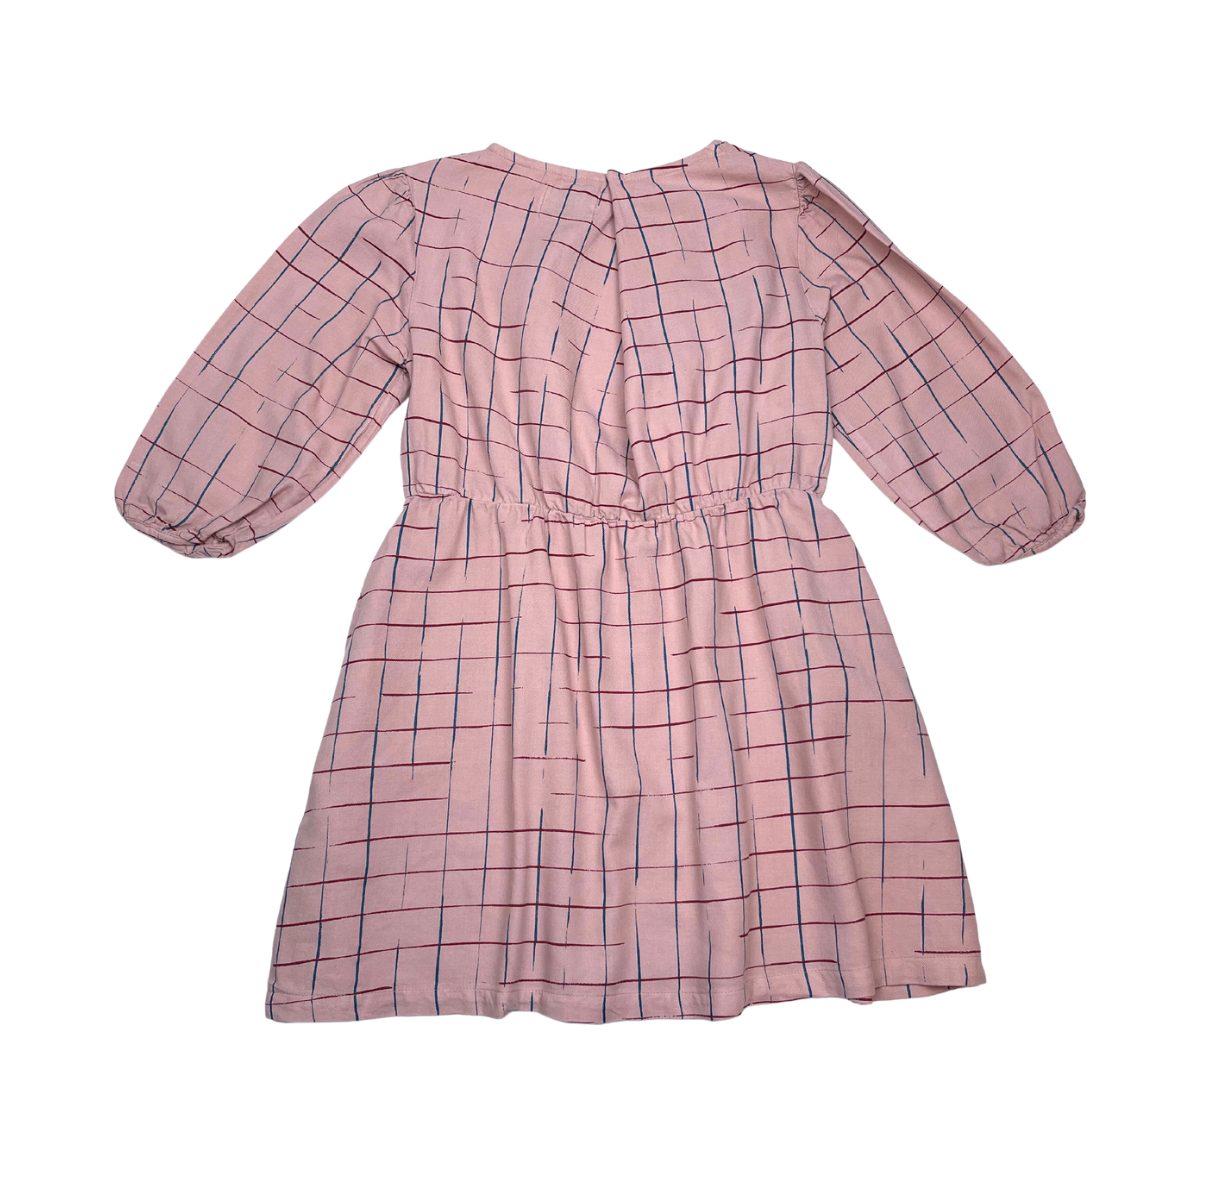 BOBO CHOSES - Robe rose à carreaux "lost things recollector" - 2/3 ans